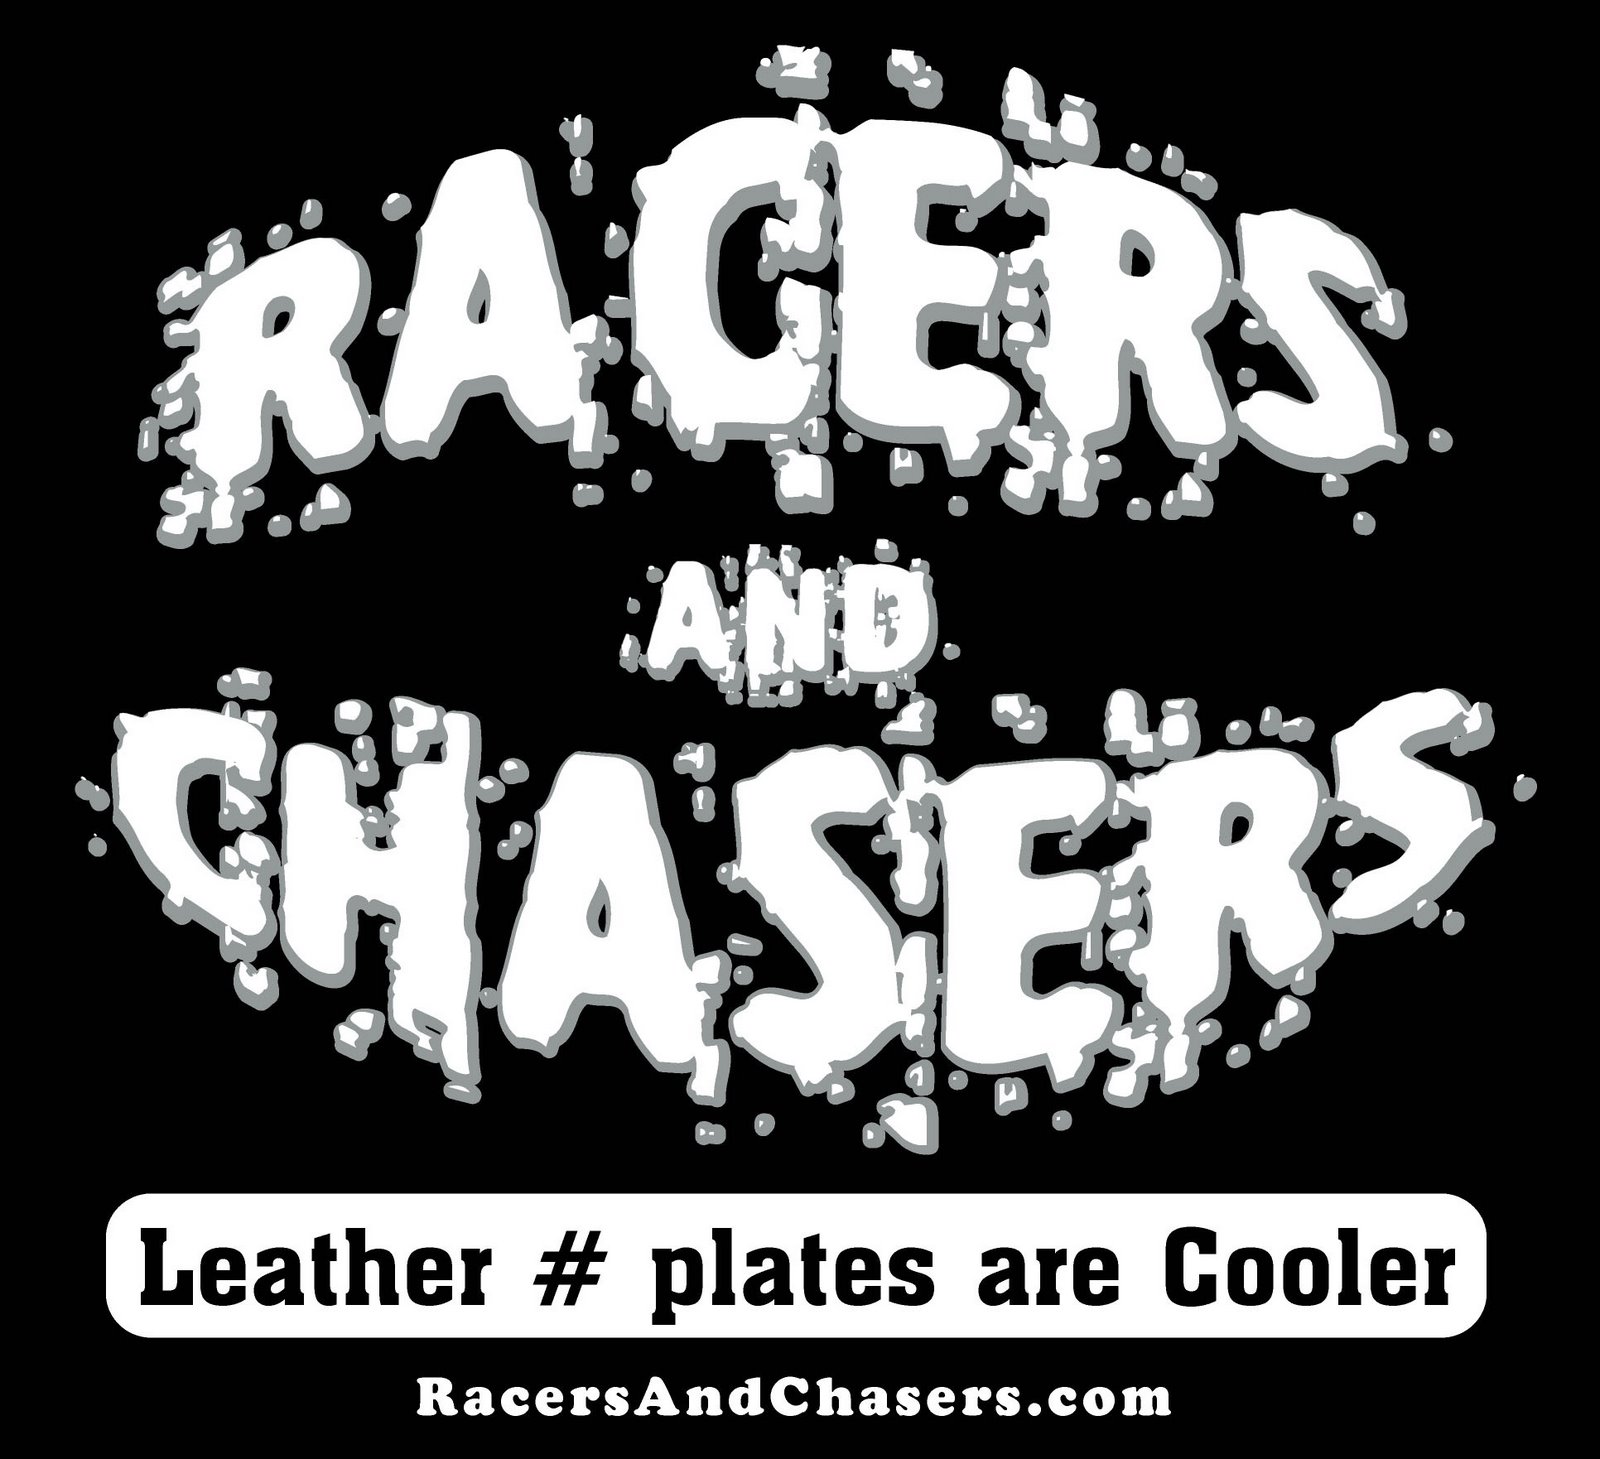 [Racers+and+Chasers.jpg]